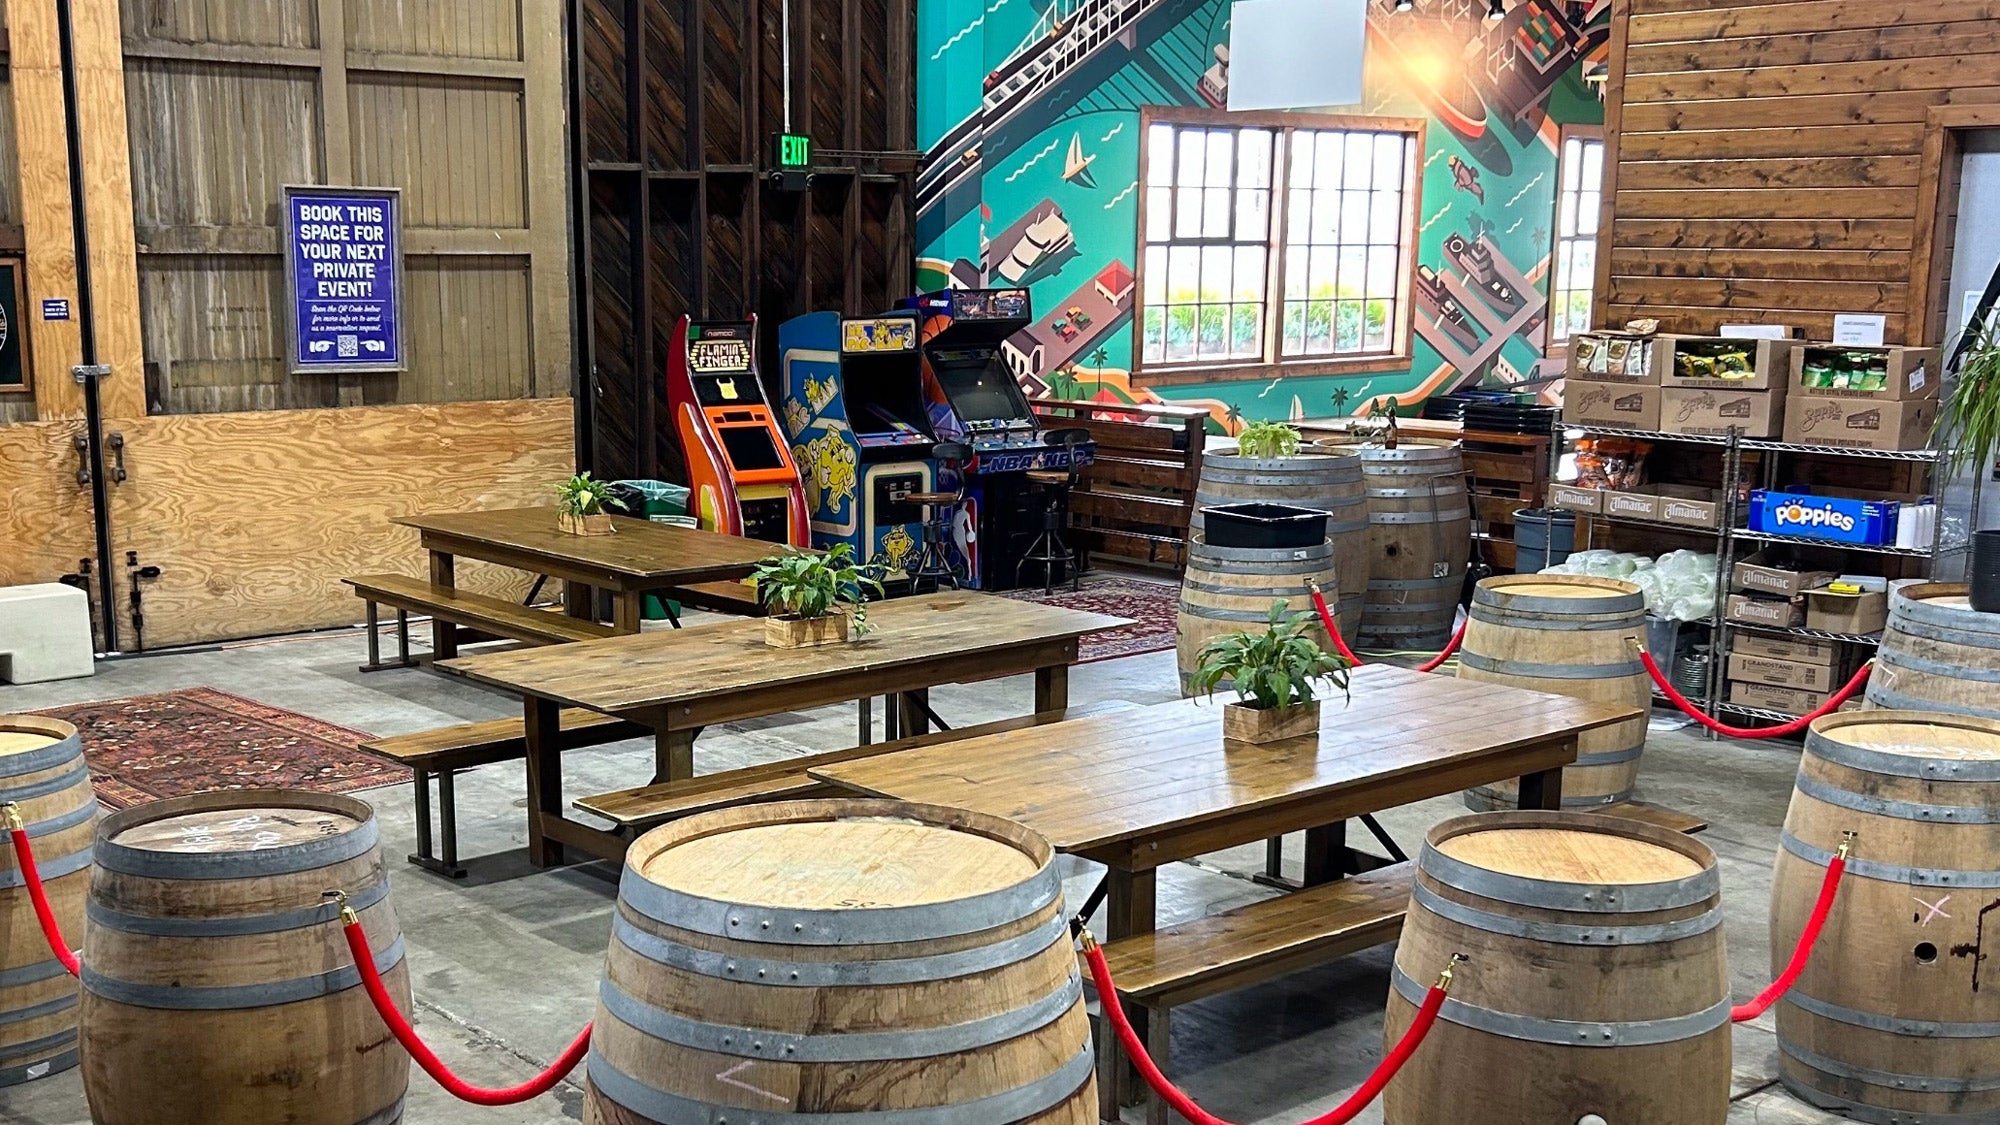 Cellar East  - Private Event Rental Space at Almanac Brewery